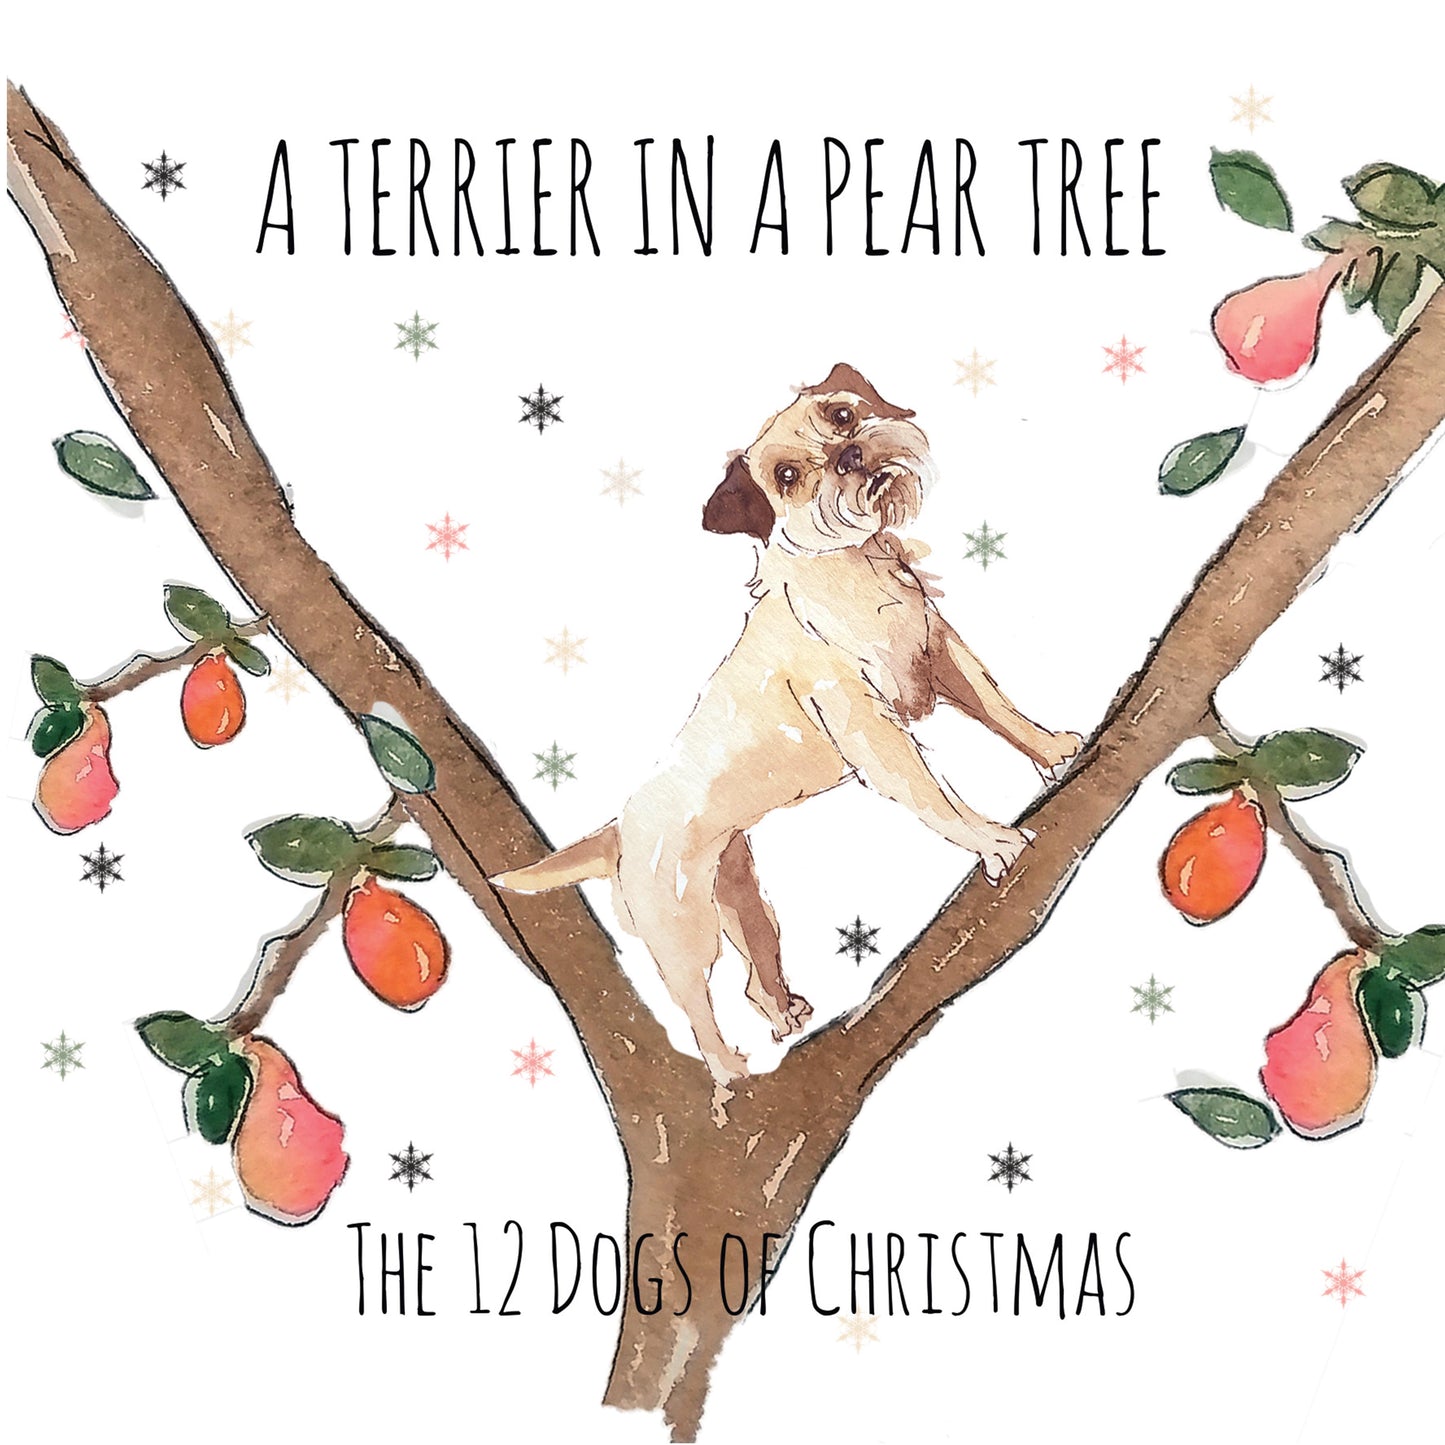 Load image into Gallery viewer, A Terrier in a Pear Tree - Greeting Card
